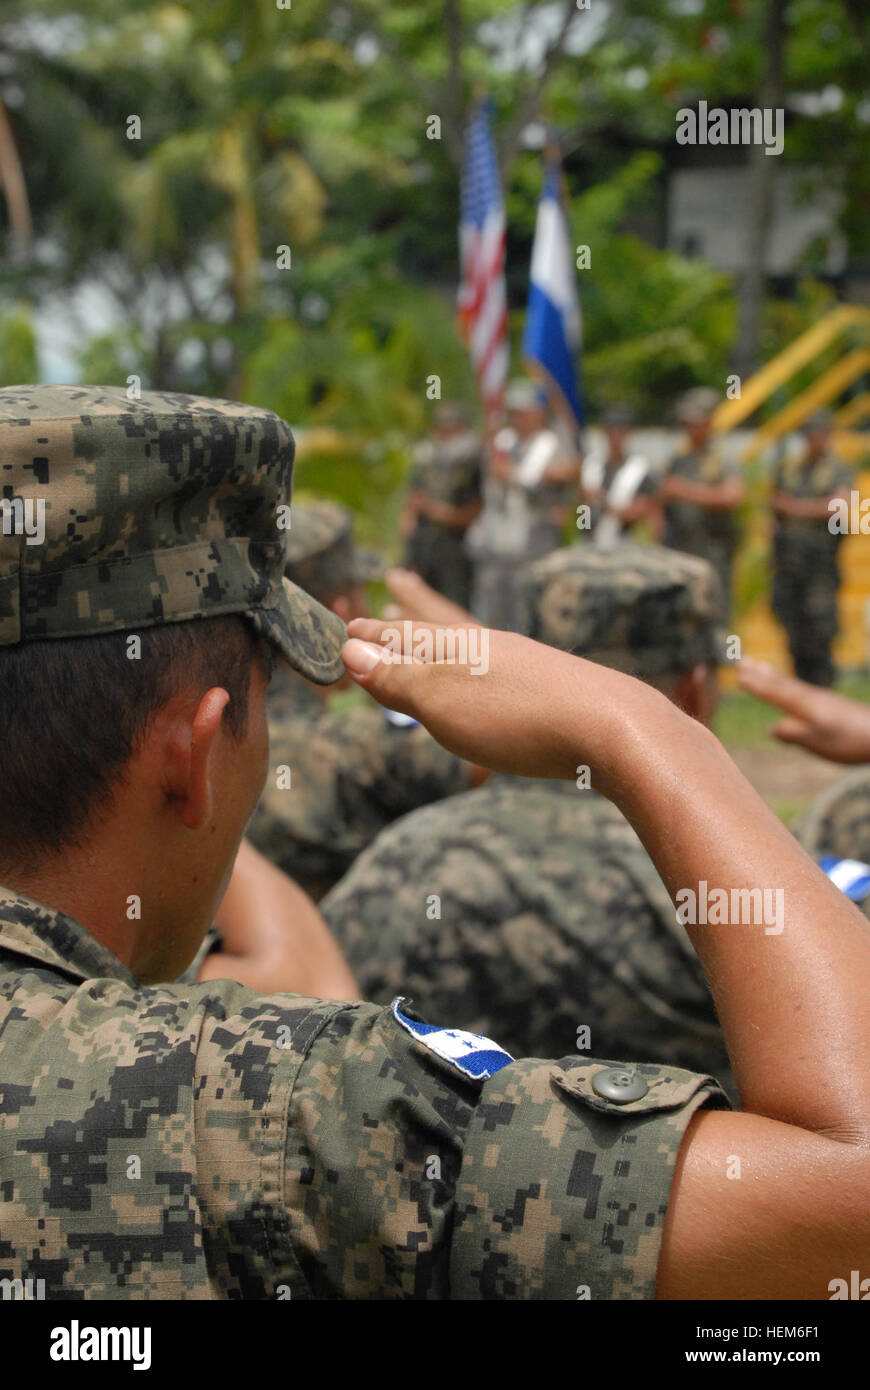 Honduran soldiers salute during the playing of the national anthems of the U.S. and Honduras during the closing ceremony for Beyond the Horizon Honduras 2012 held at Forward Operating Base Naco, Honduras, June 26. BTH Honduras is an Army South-led exercise that deploys military engineers and medical professionals to Honduras for training, while providing services to rural communities. Honduran soldier salutes during BTH-Honduras 2012 Closing Ceremony 120626-A-PP526-004 Stock Photo